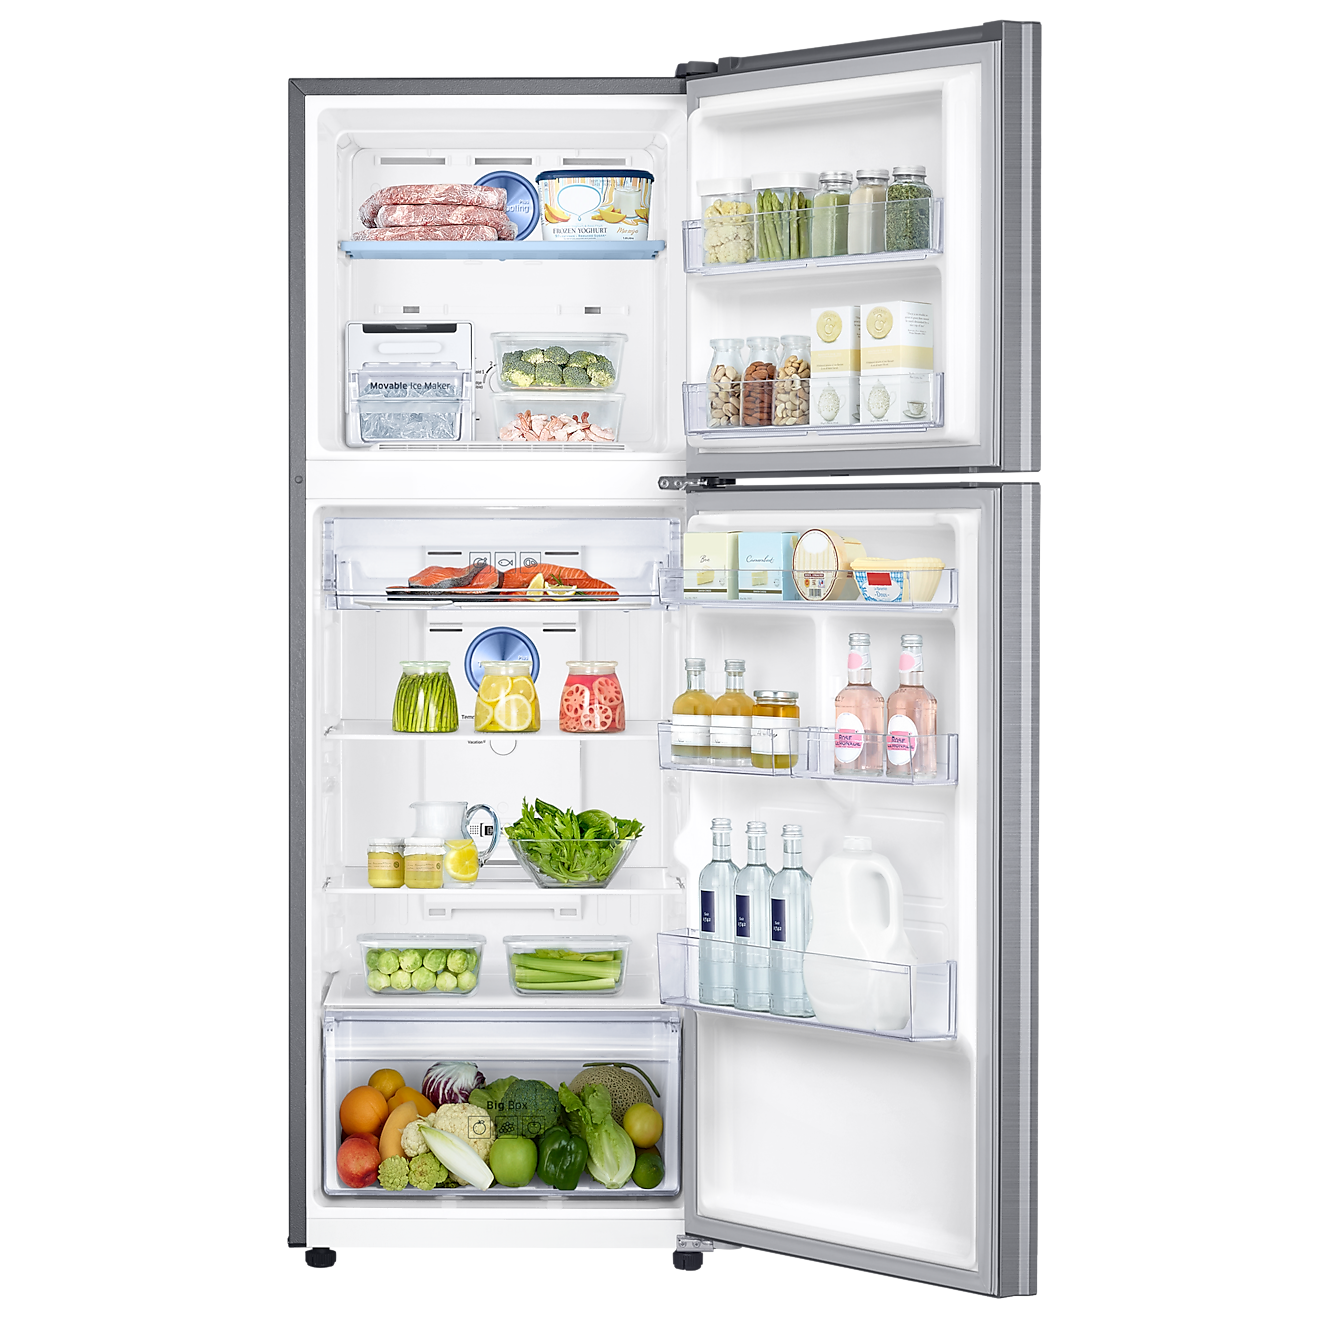 SAMSUNG 321 Liter Inverter Top Mount Refrigerator with 5 in 1 Convertible Mode RT34K5532S8/D3